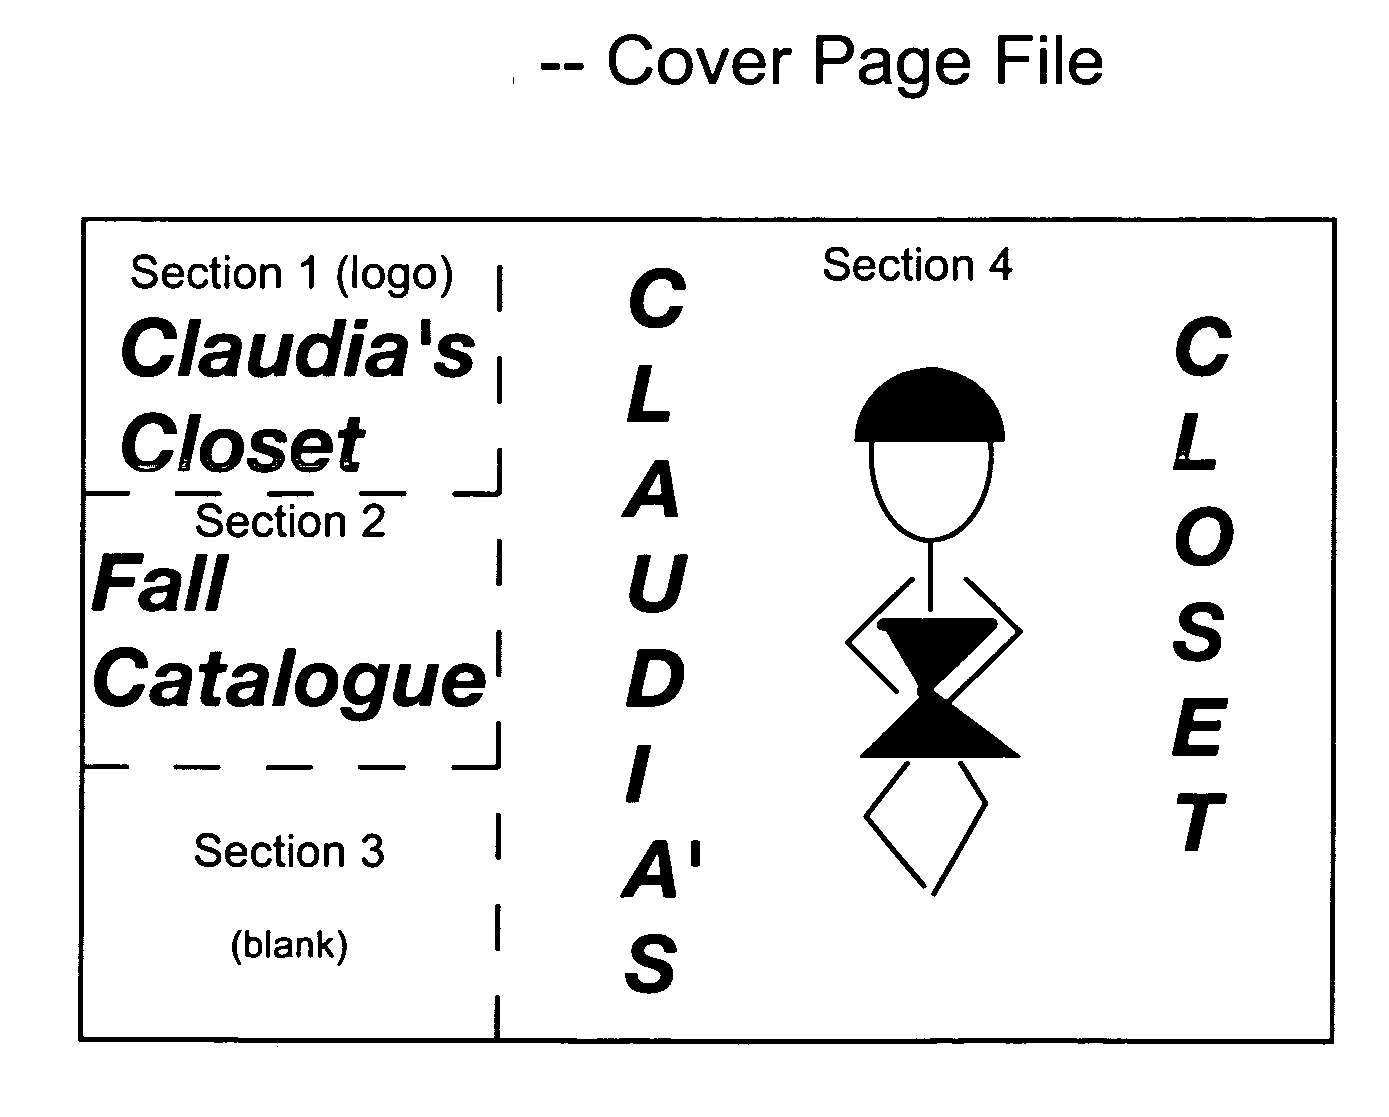 System and method for production, delivery, recording, and viewing of video and similar content primarily intended to be viewed in step-frame/frame-advance mode